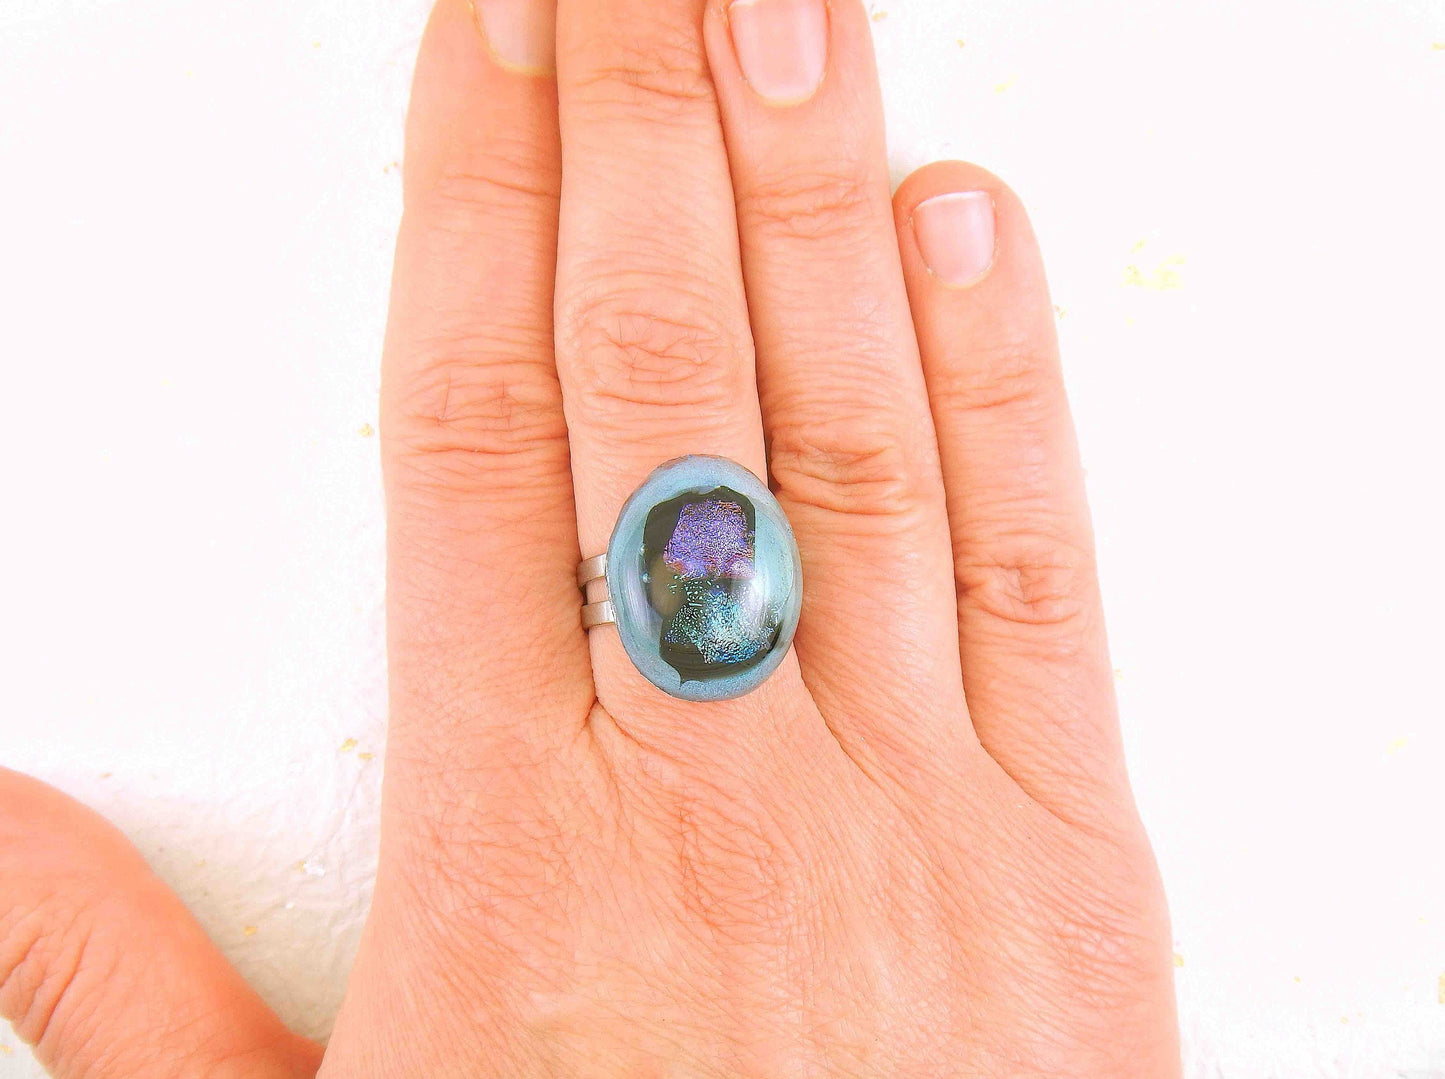 Finger ring with large oval turquoise cabochon (Murano style glass handmade in Montreal), blue-pink dichroic glass, stainless steel adjustable base (US 8-9)